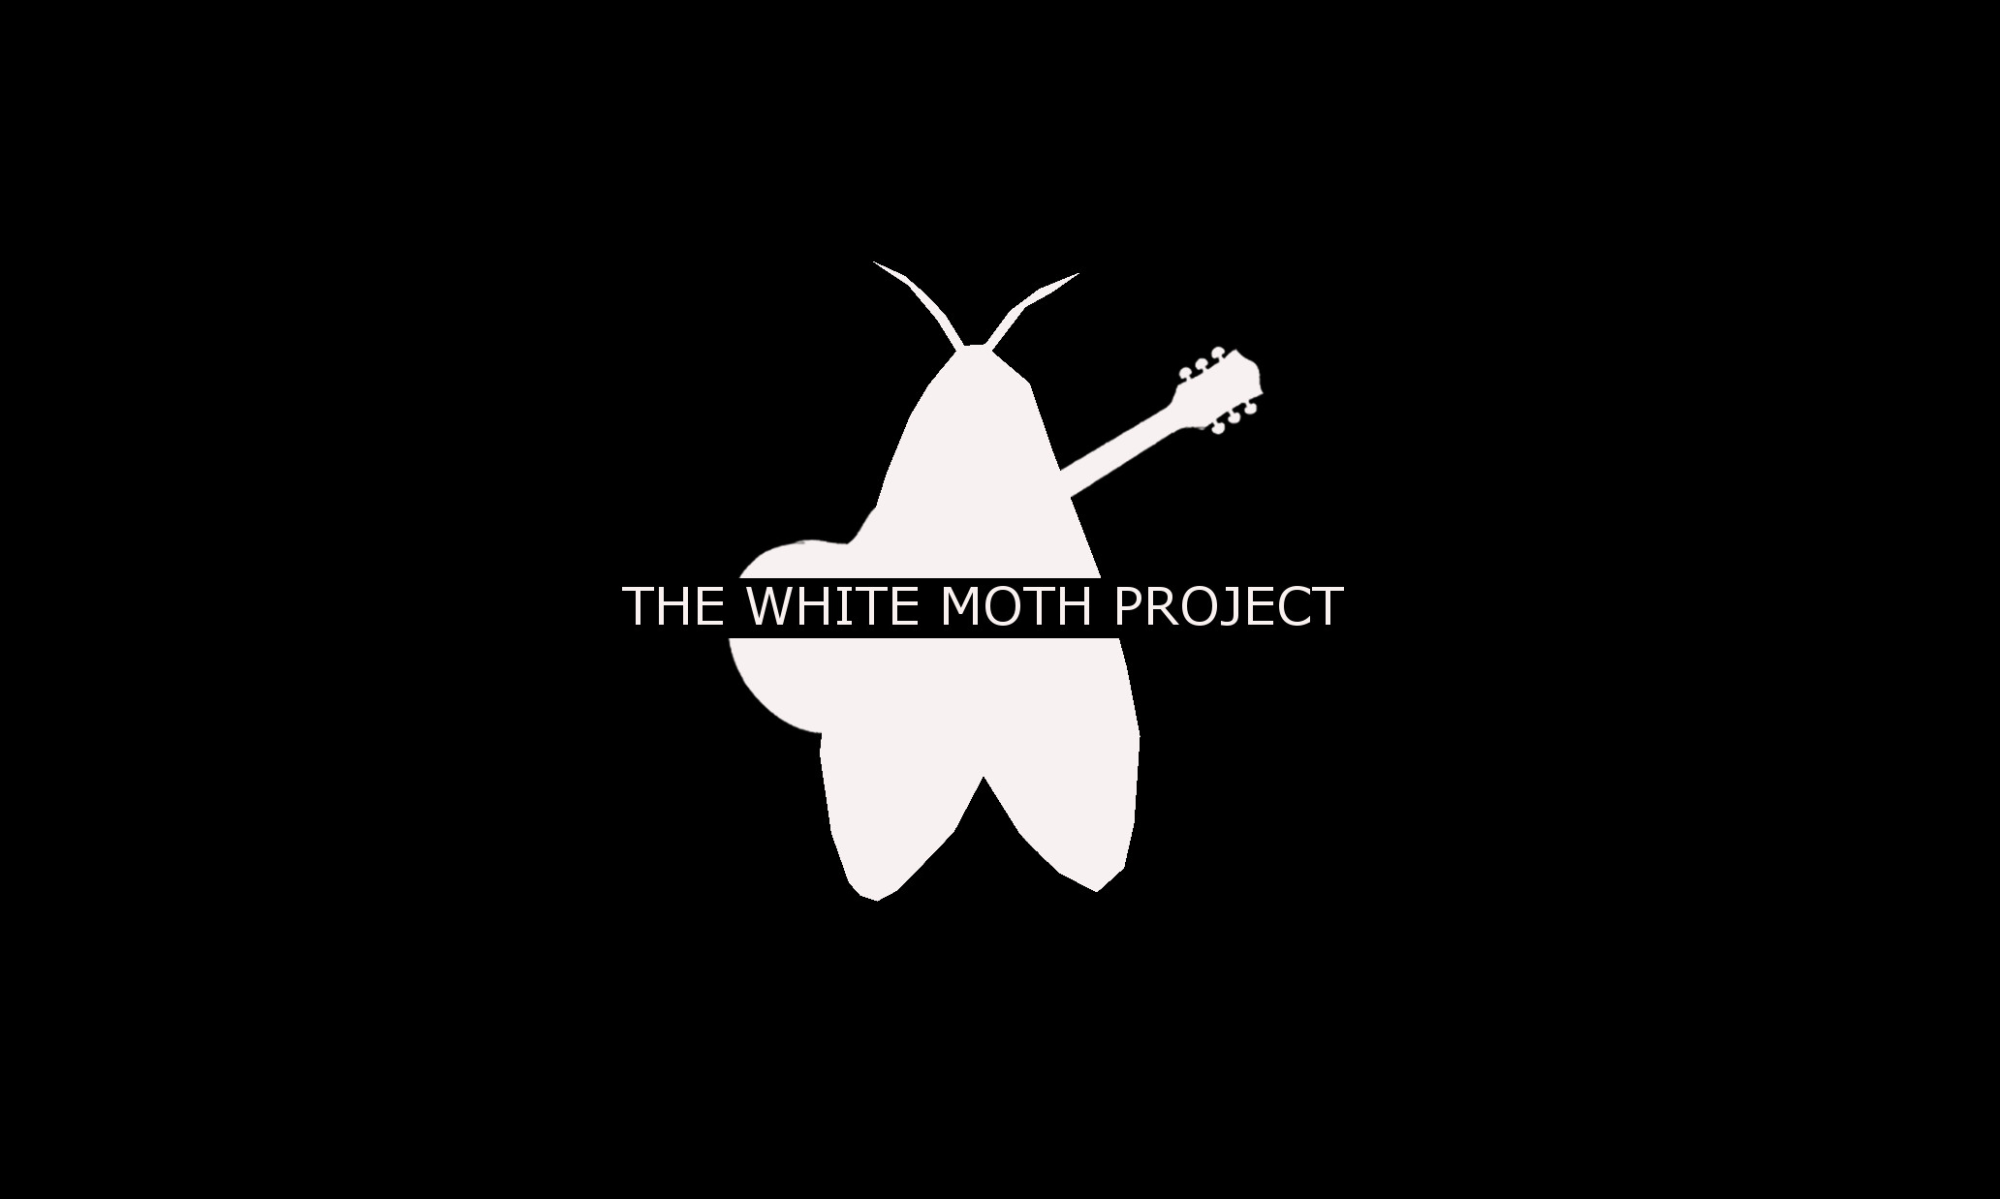 THE WHITE MOTH PROJECT